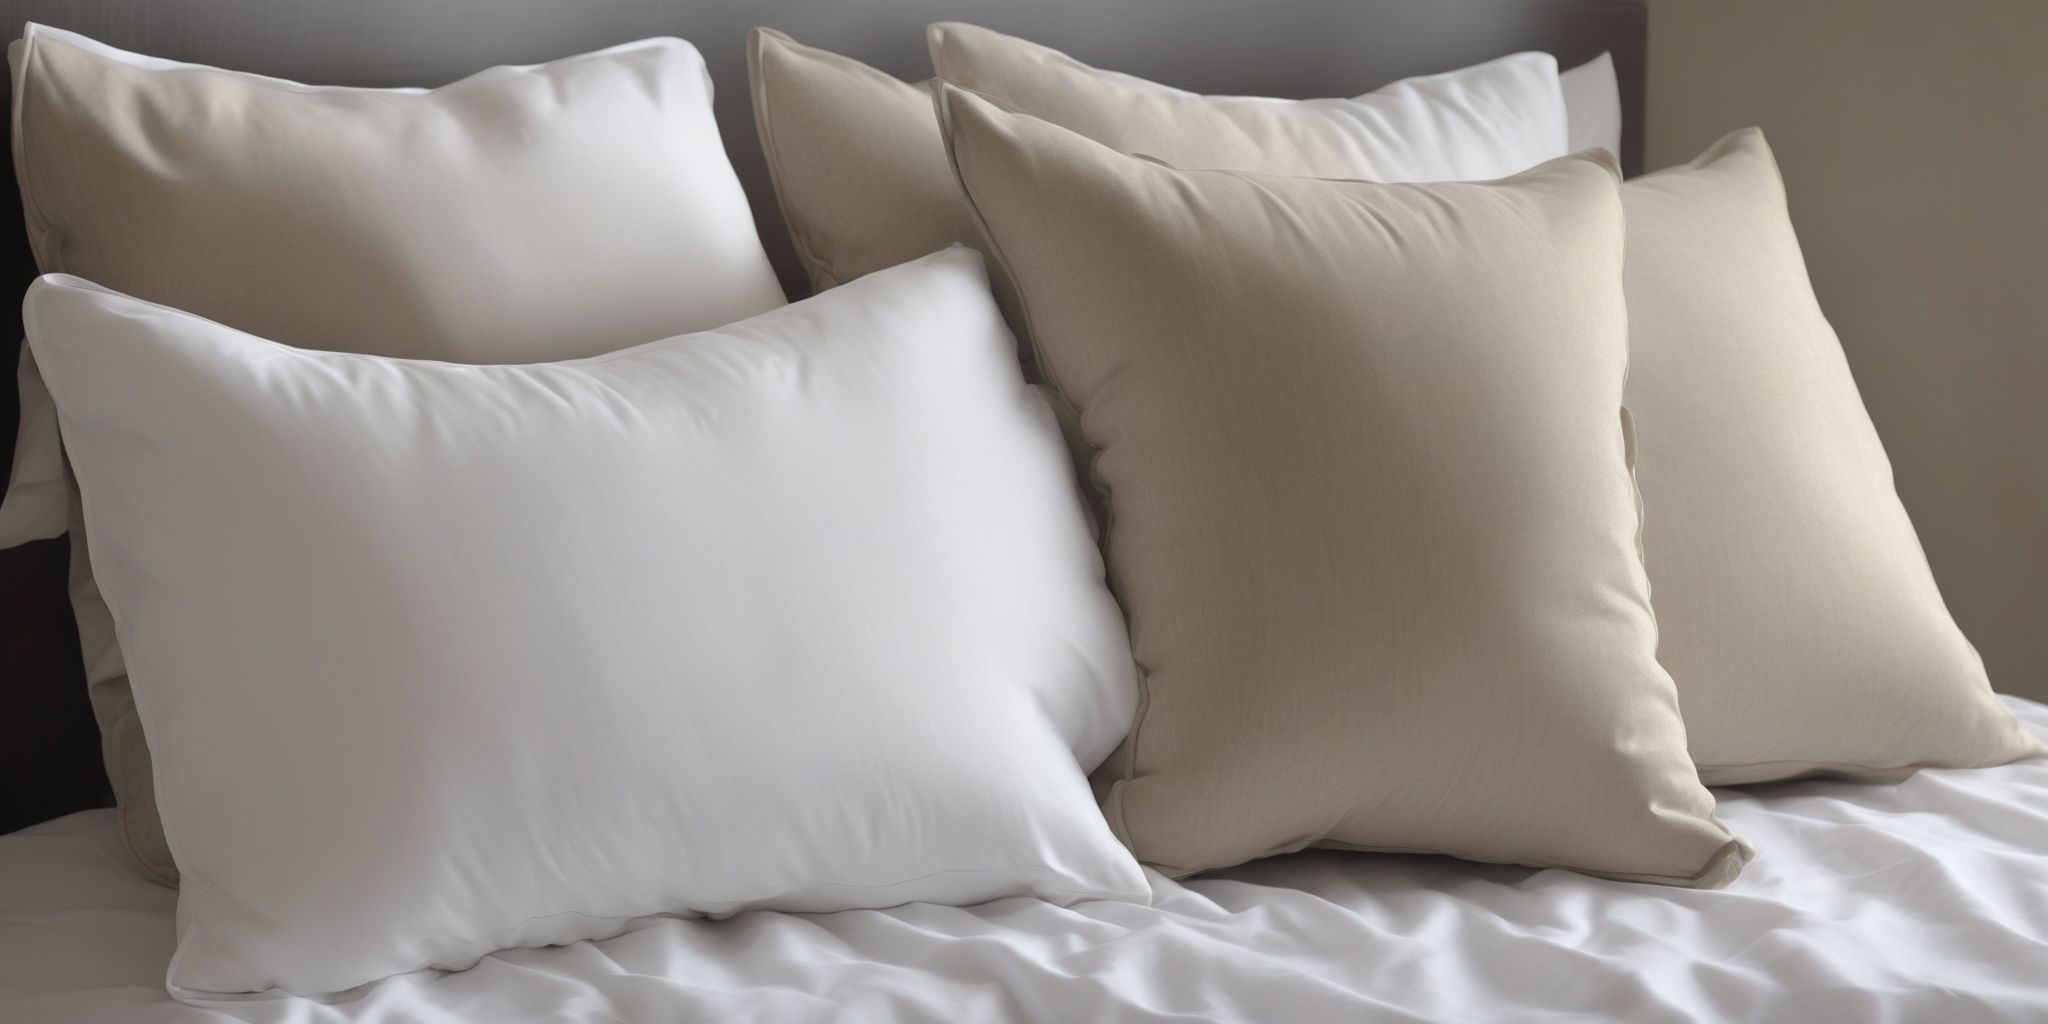 Long-term care: Pillows  in realistic, photographic style